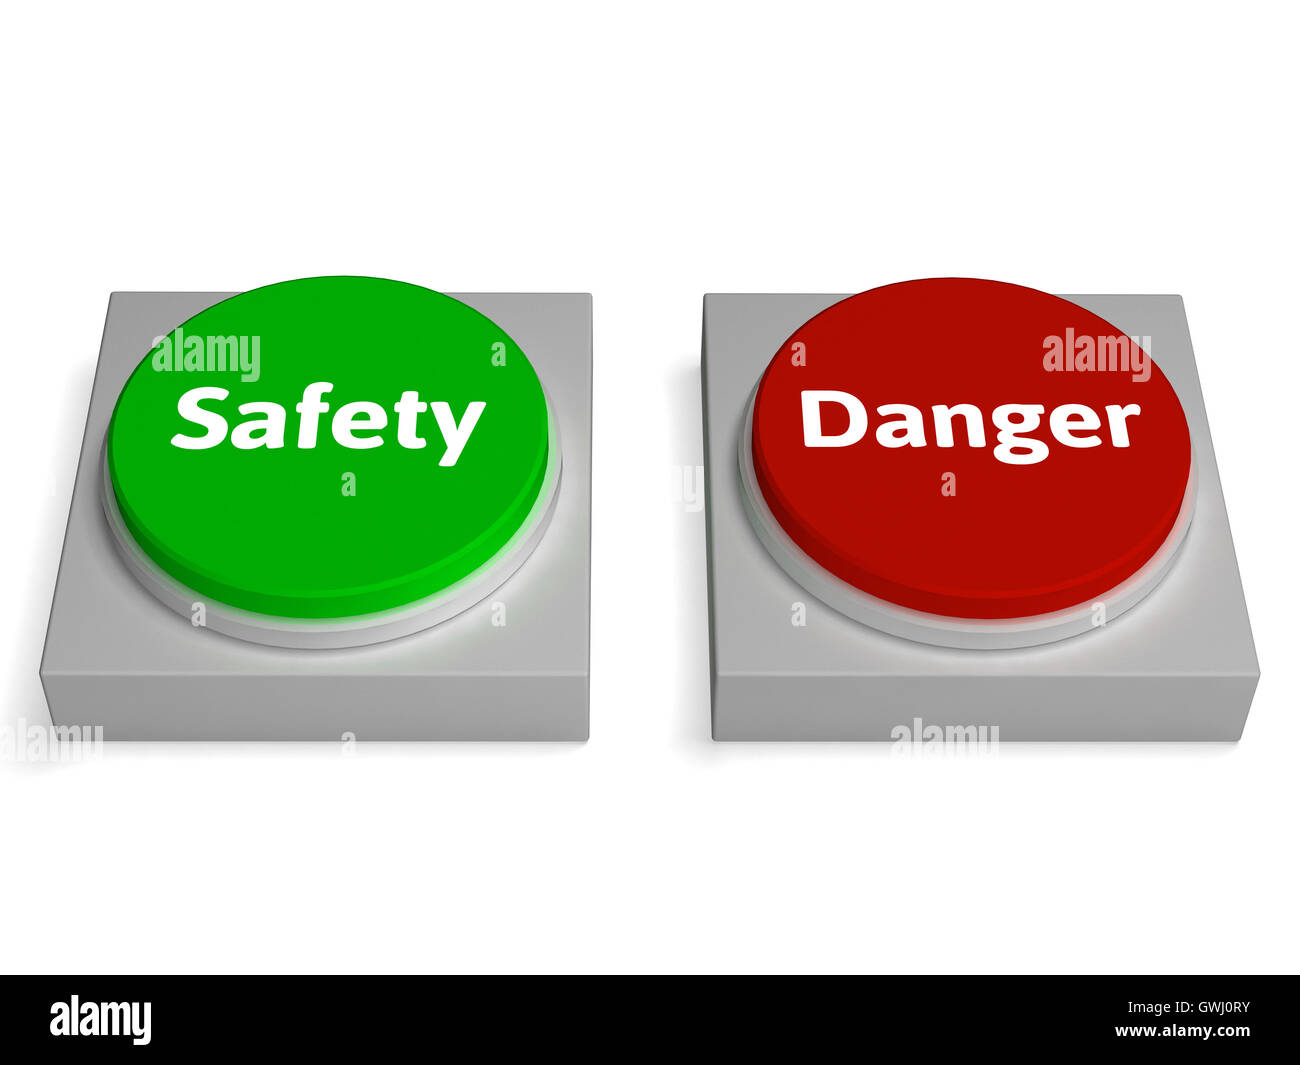 Danger Safety Buttons Show Safe Or Harmful Stock Photo